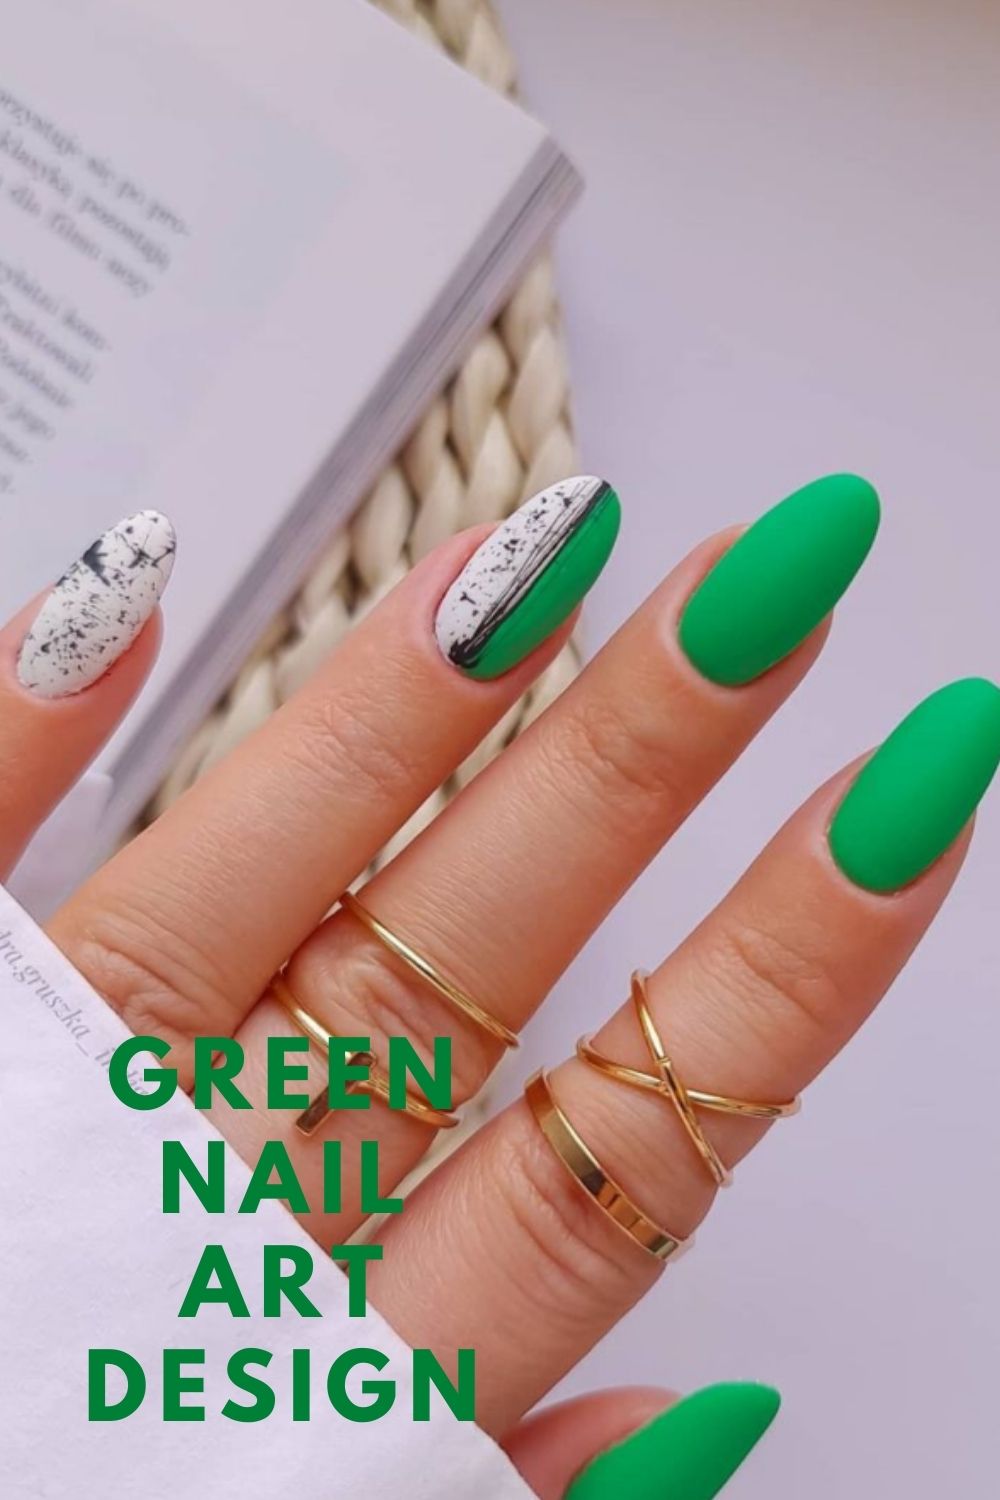 Black and white, green almond nails art